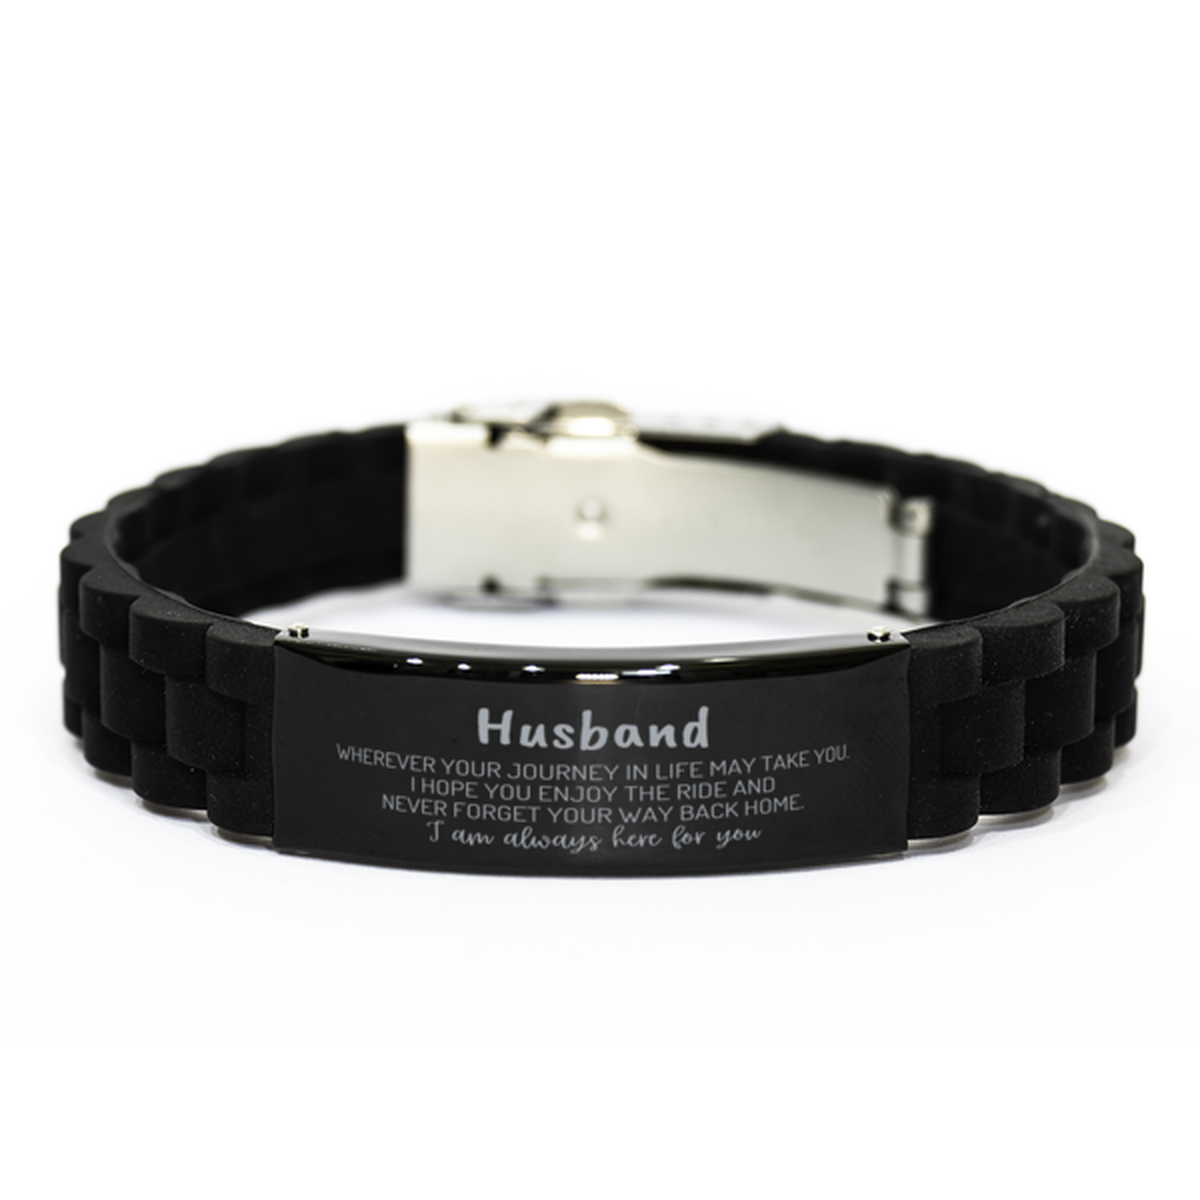 Husband wherever your journey in life may take you, I am always here for you Husband Black Glidelock Clasp Bracelet, Awesome Christmas Gifts For Husband, Husband Birthday Gifts for Men Women Family Loved One